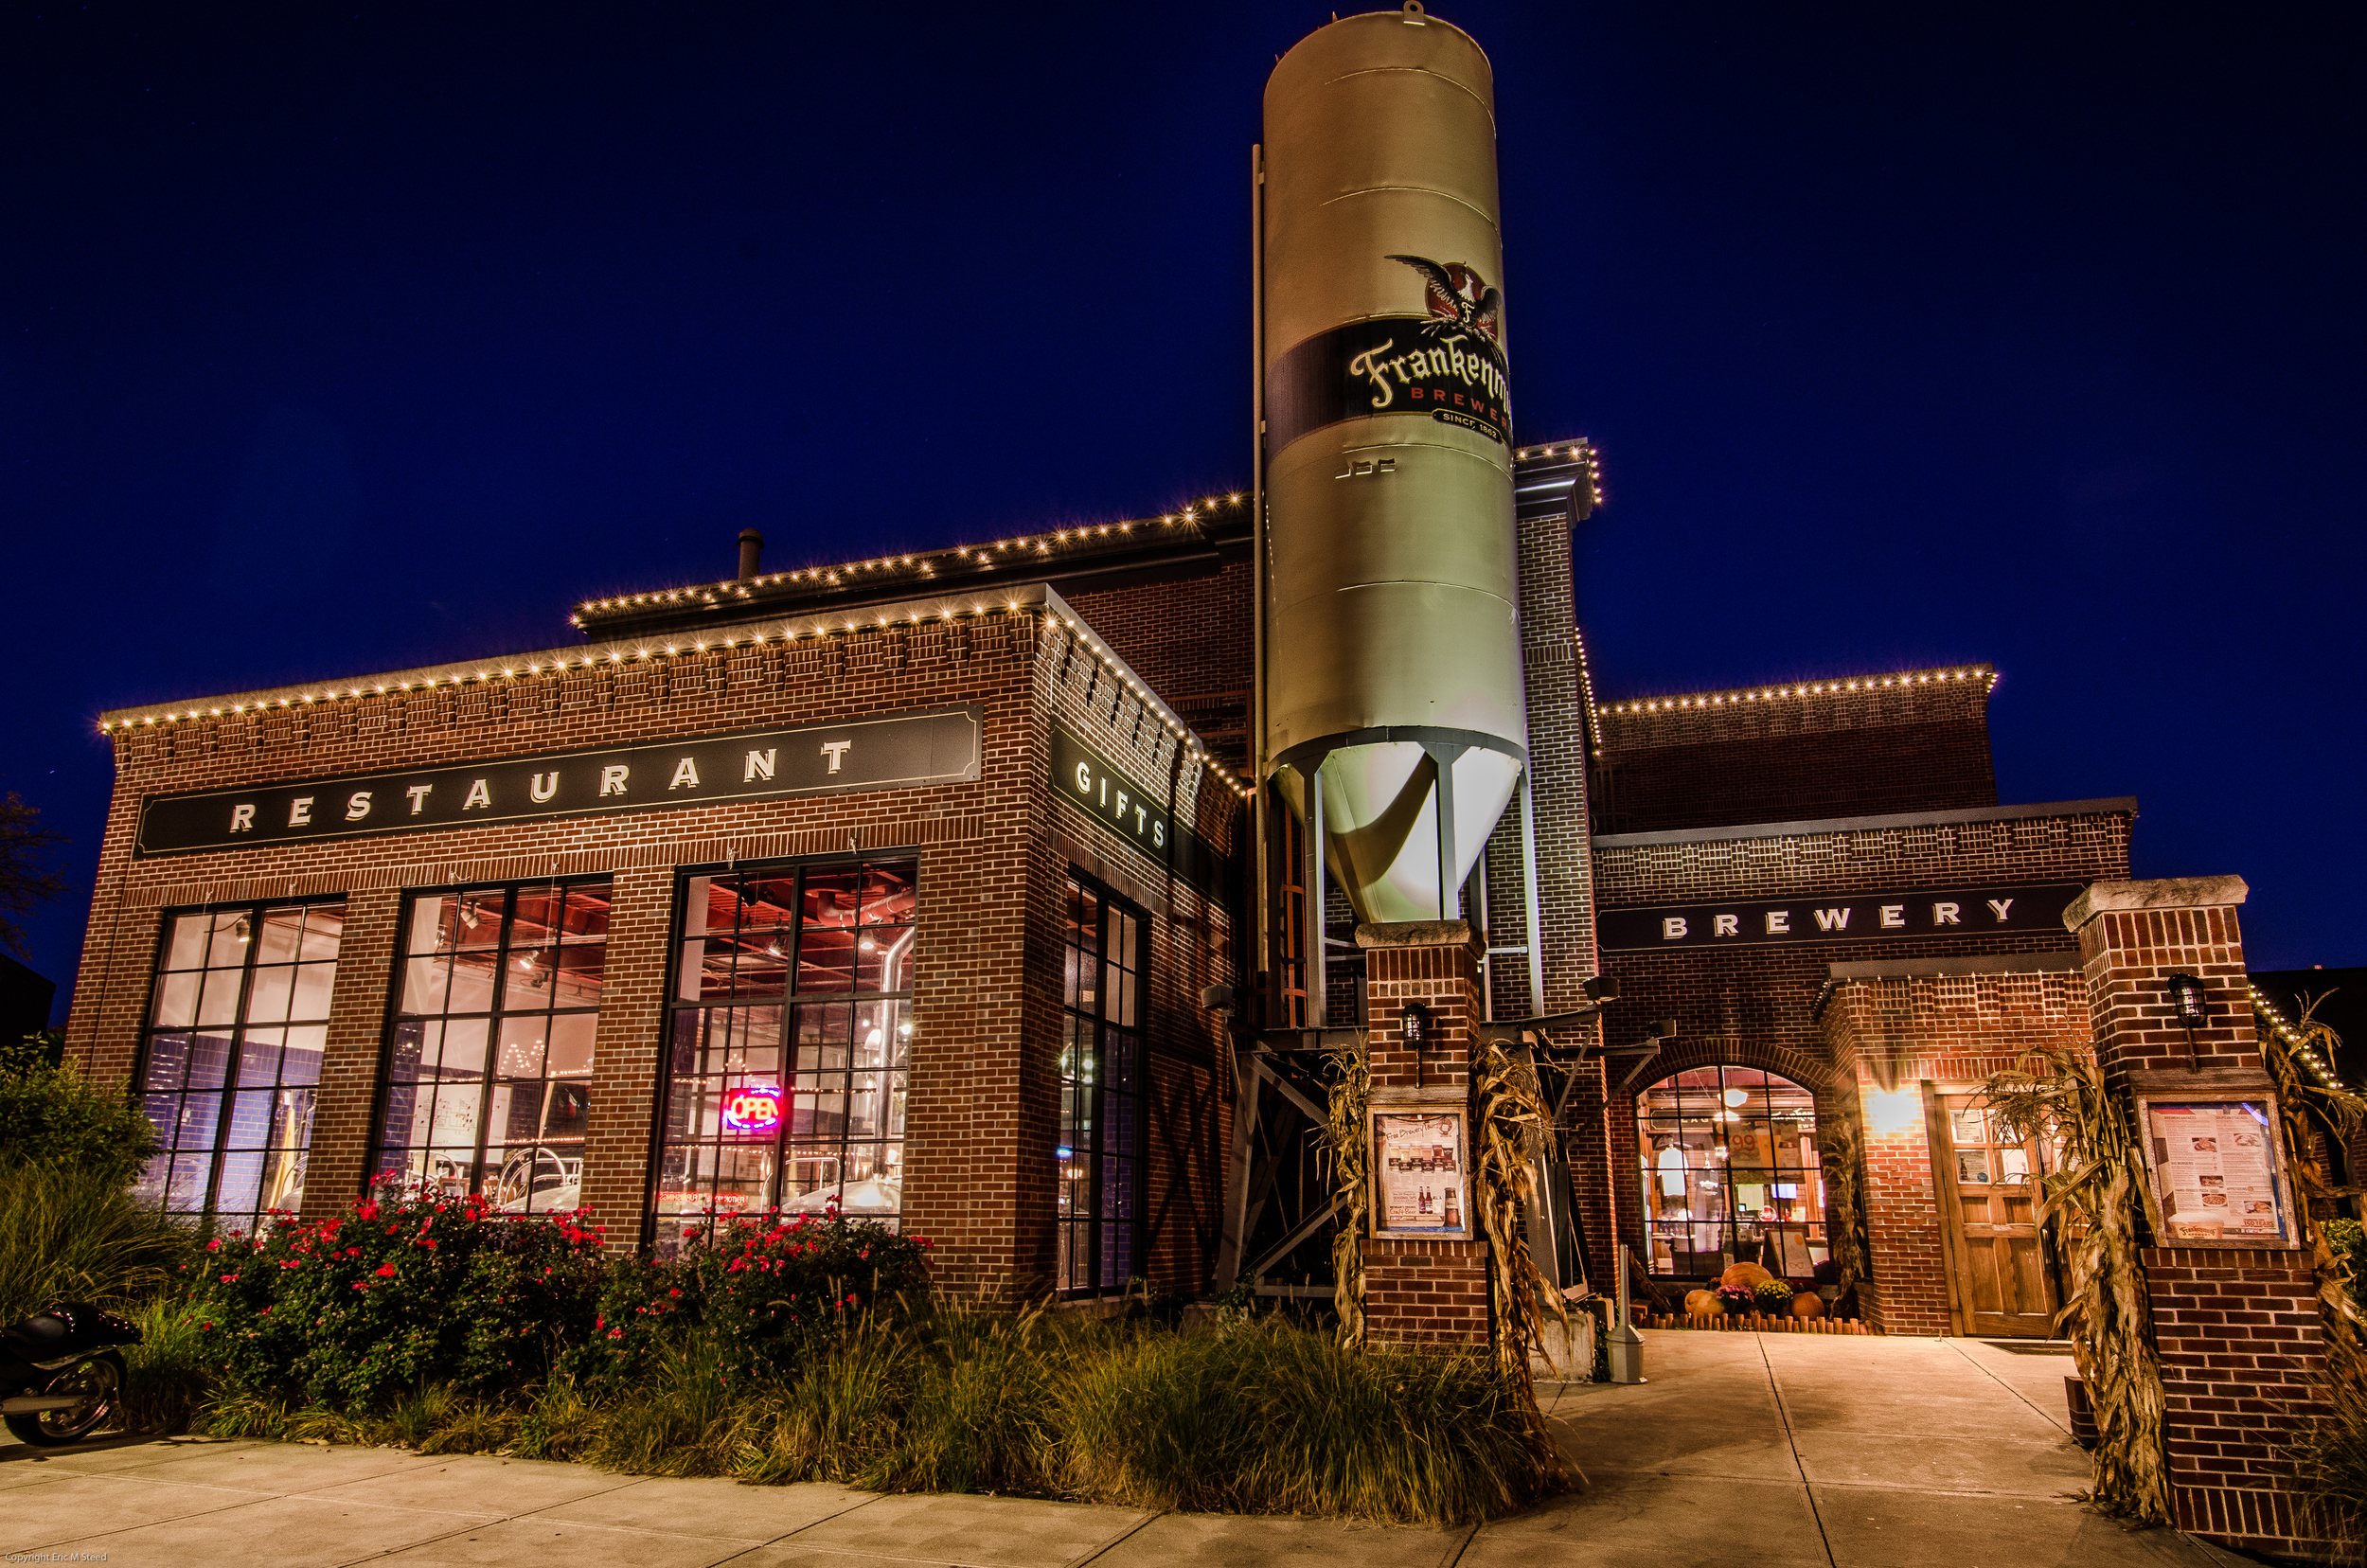 Frankenmuth Brewery at night